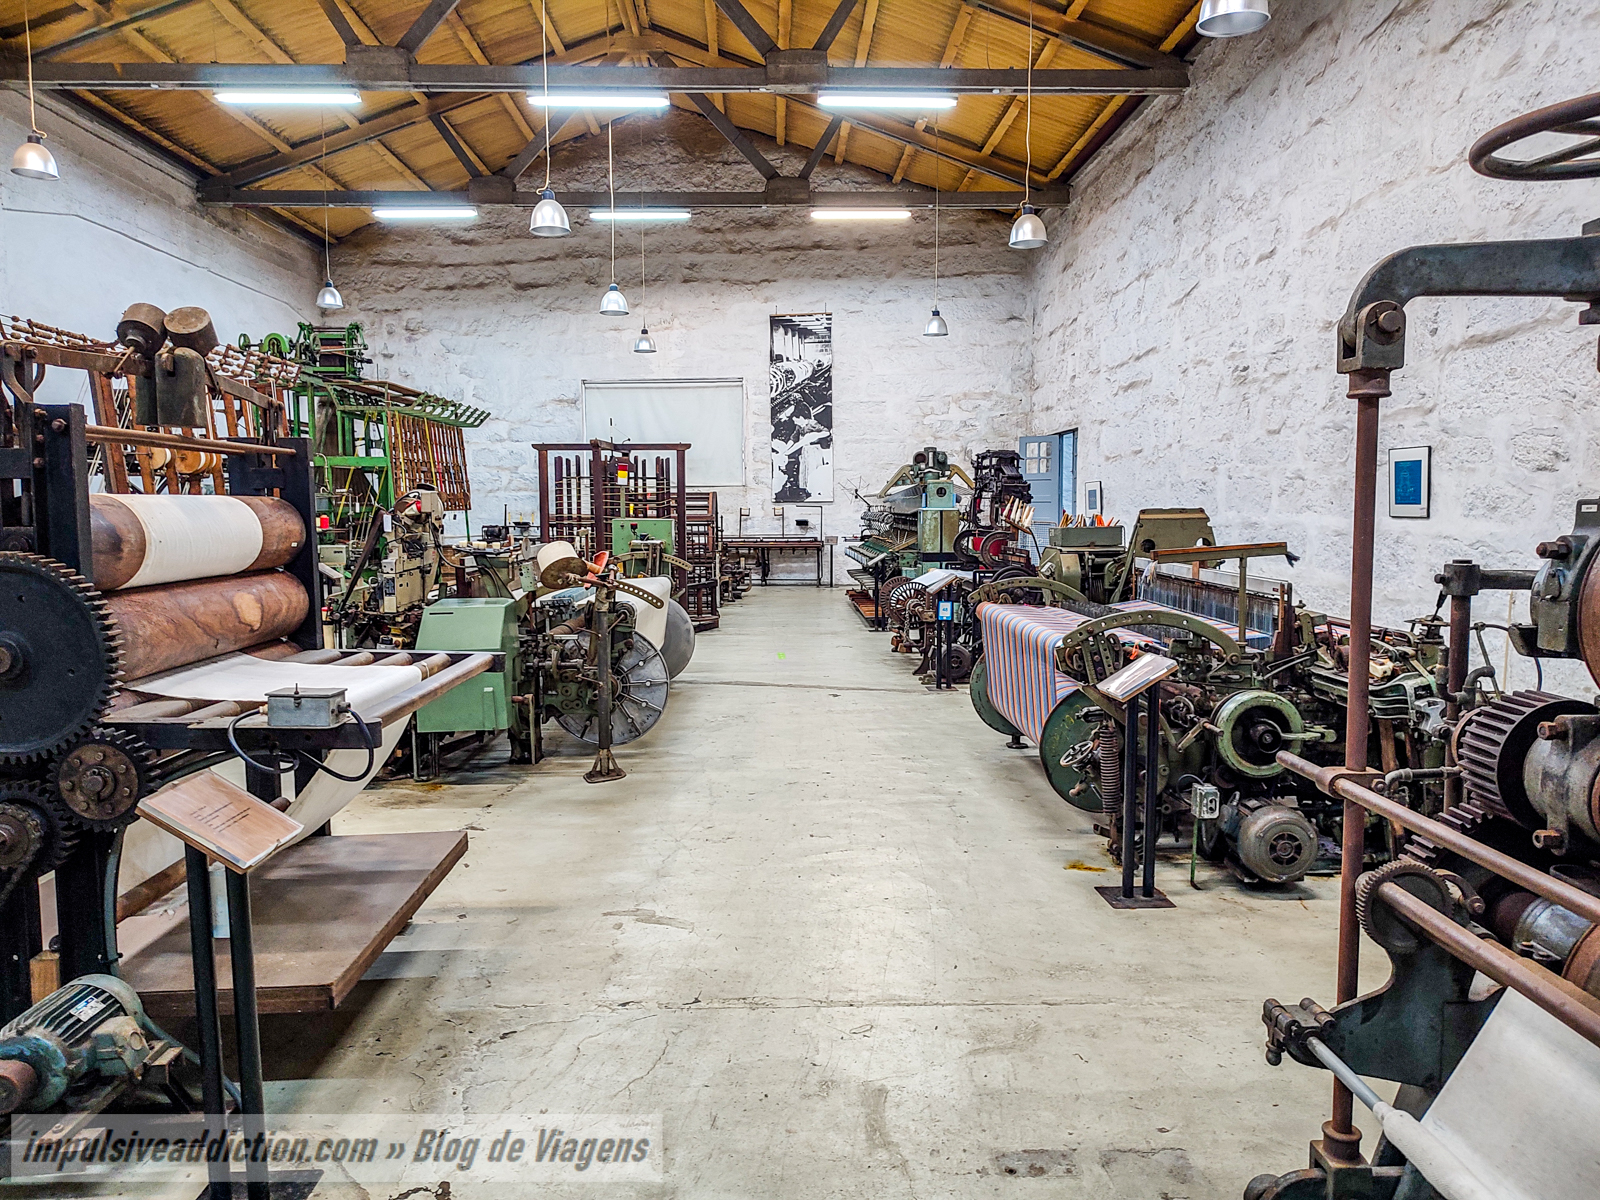 Textile Industry Museum